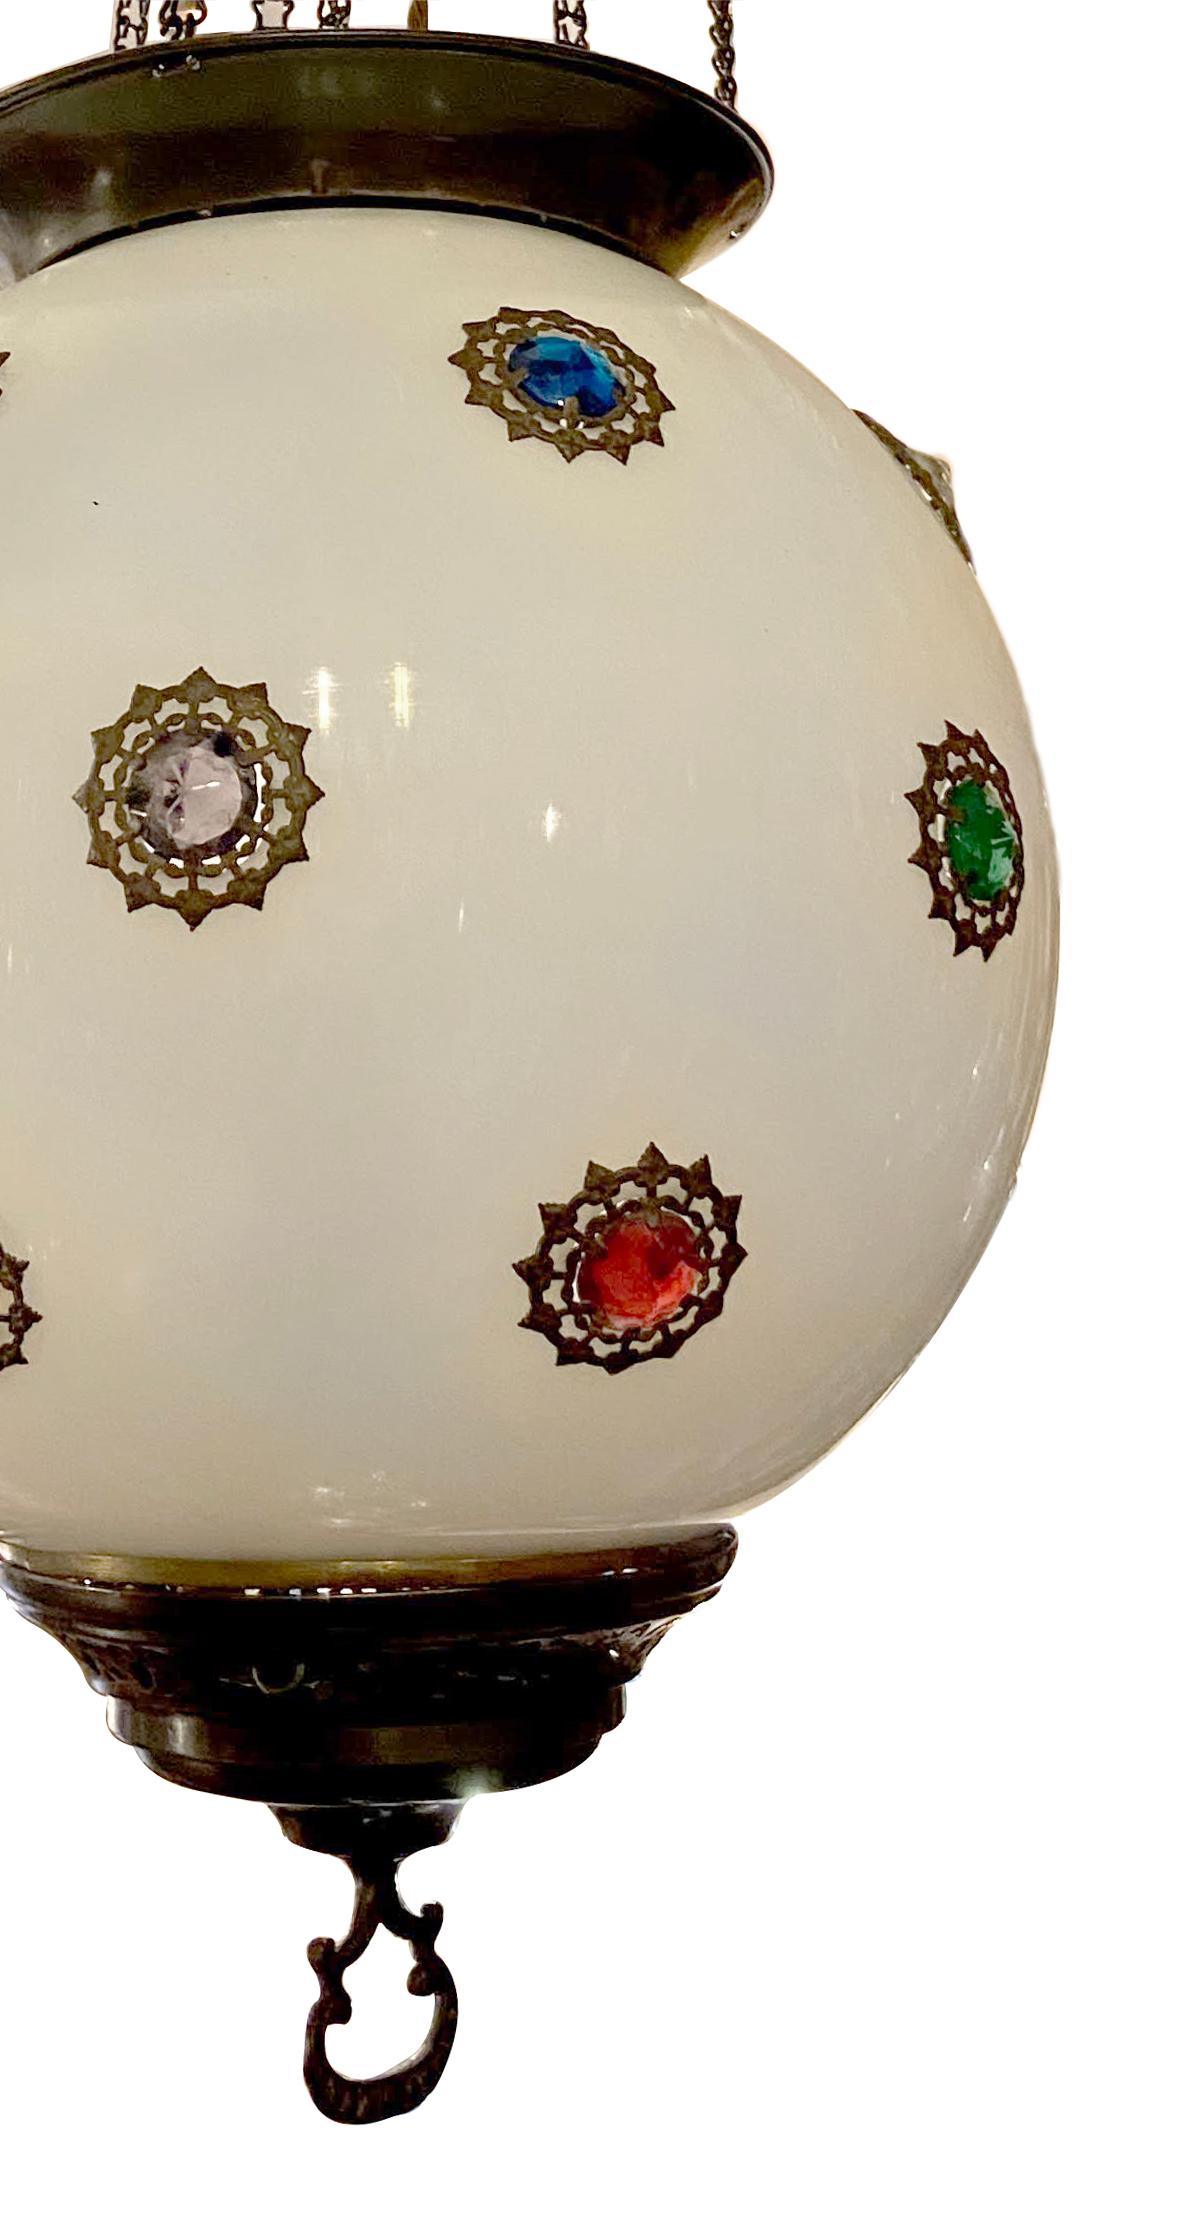 A late 19th century blown opaline glass lantern with colored crystal insets and interior lights.

Measurements:
Diameter 12